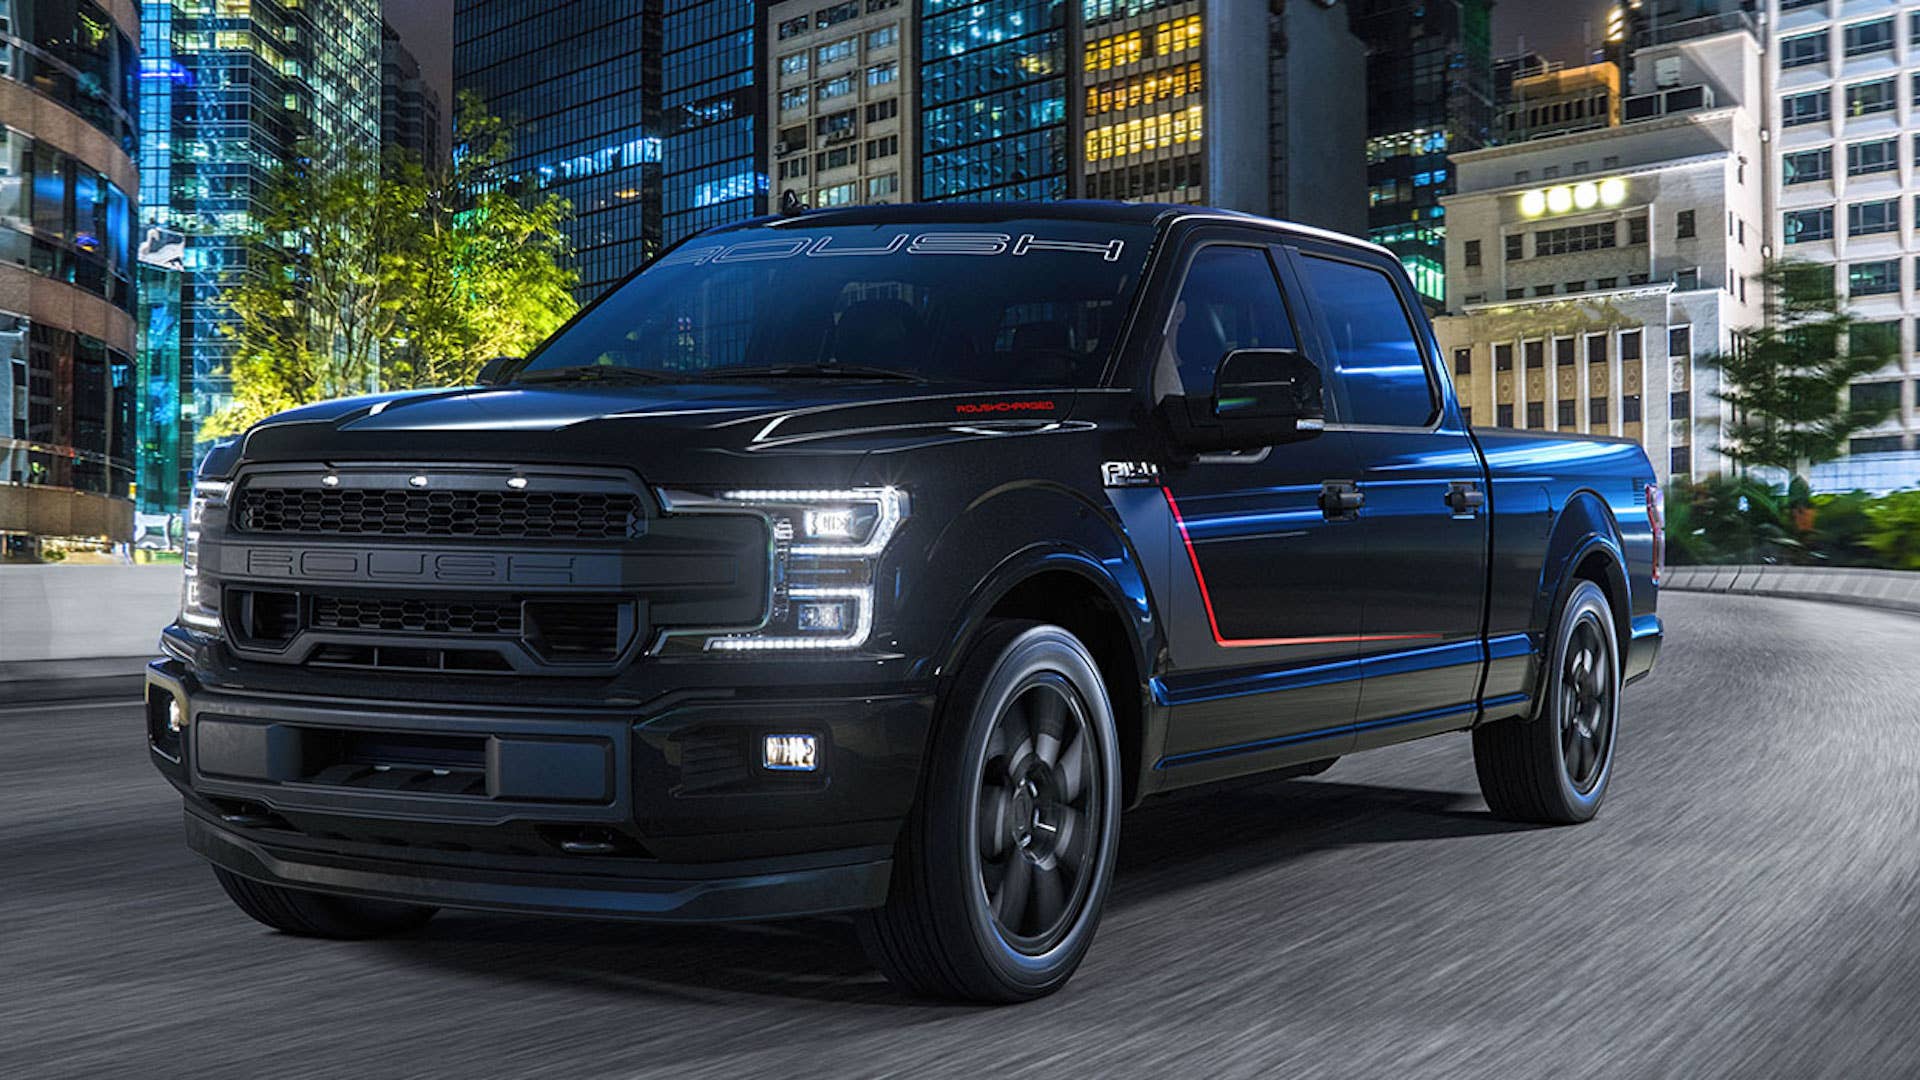 Roush Unleashes Supercharged Ford F 150 Nitemare Edition Pickup With 650 Hp